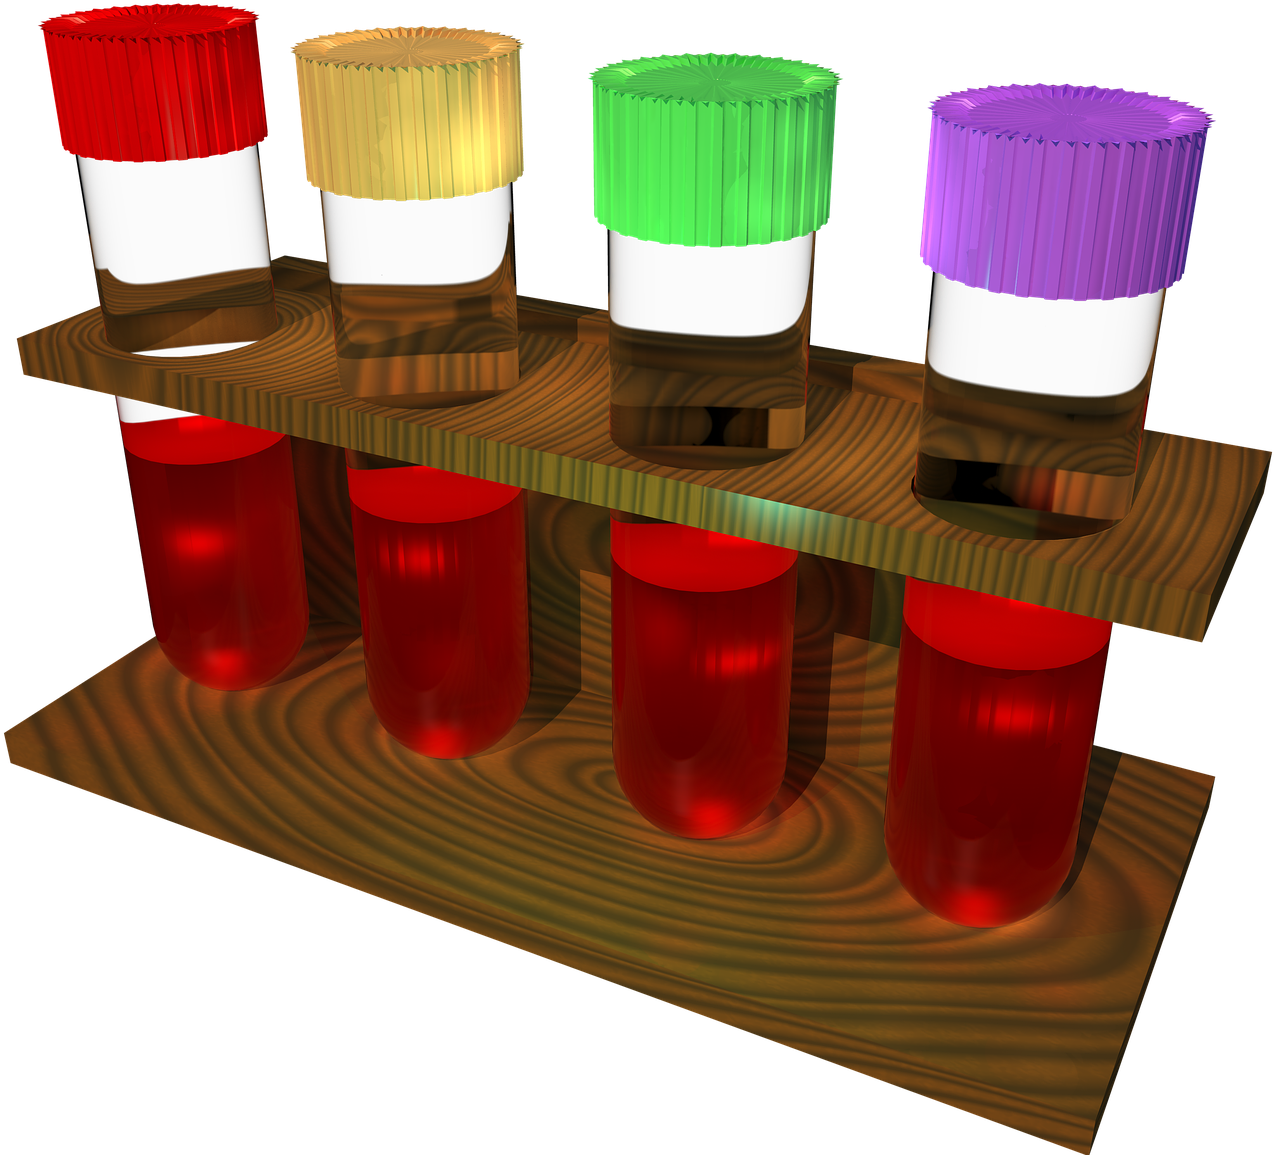 A Group Of Test Tubes With Different Colored Liquids